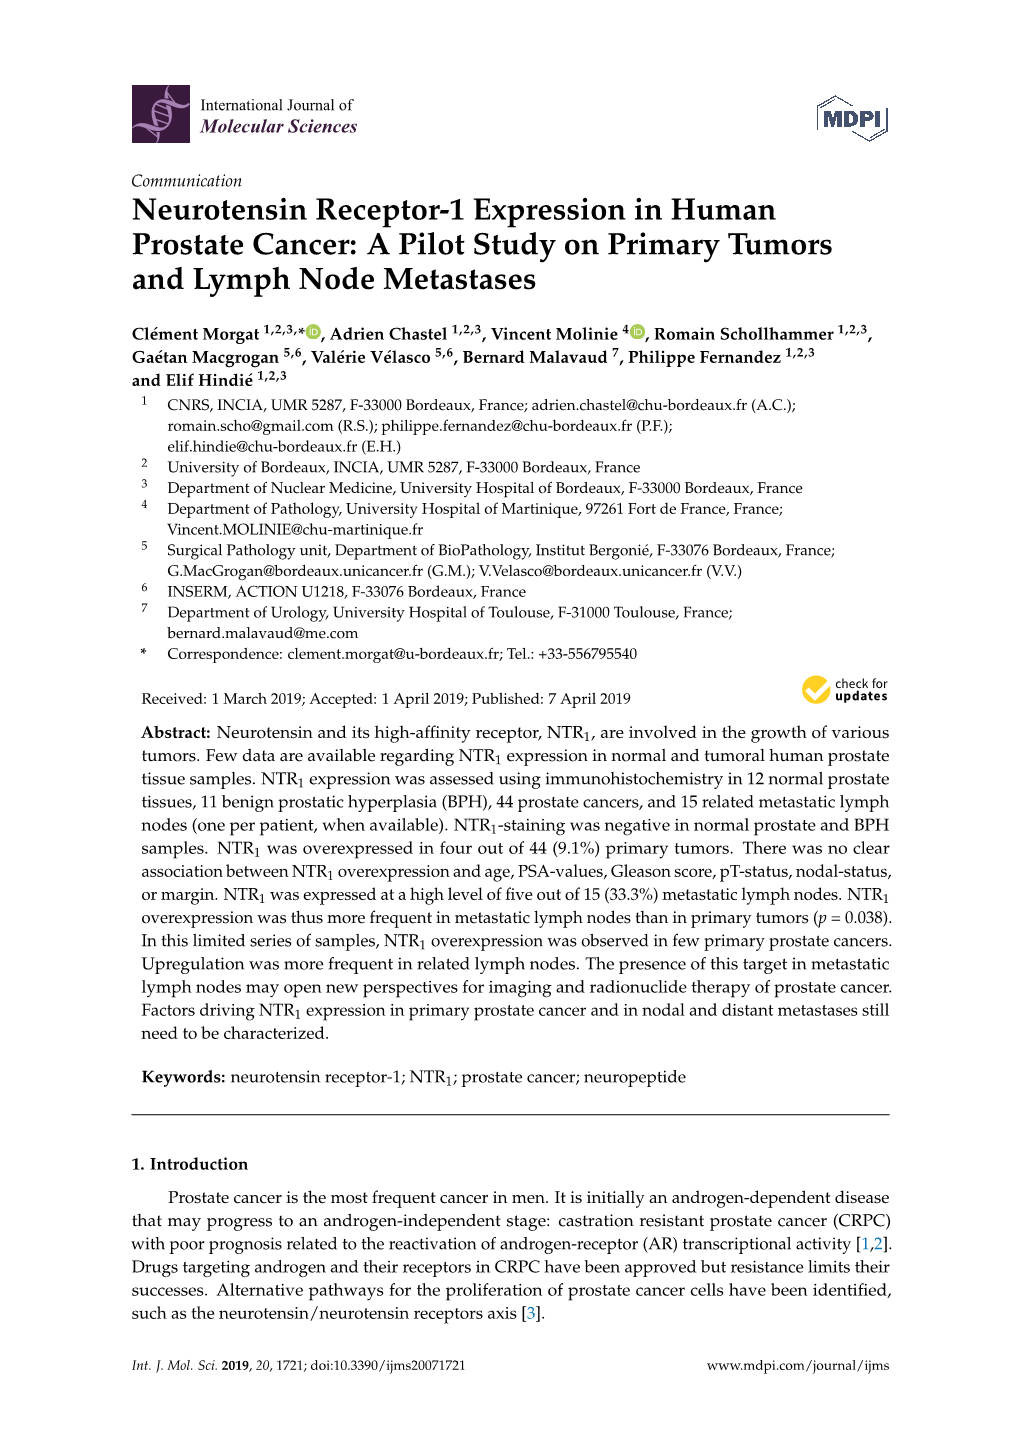 Neurotensin Receptor-1 Expression in Human Prostate Cancer: a Pilot Study on Primary Tumors and Lymph Node Metastases